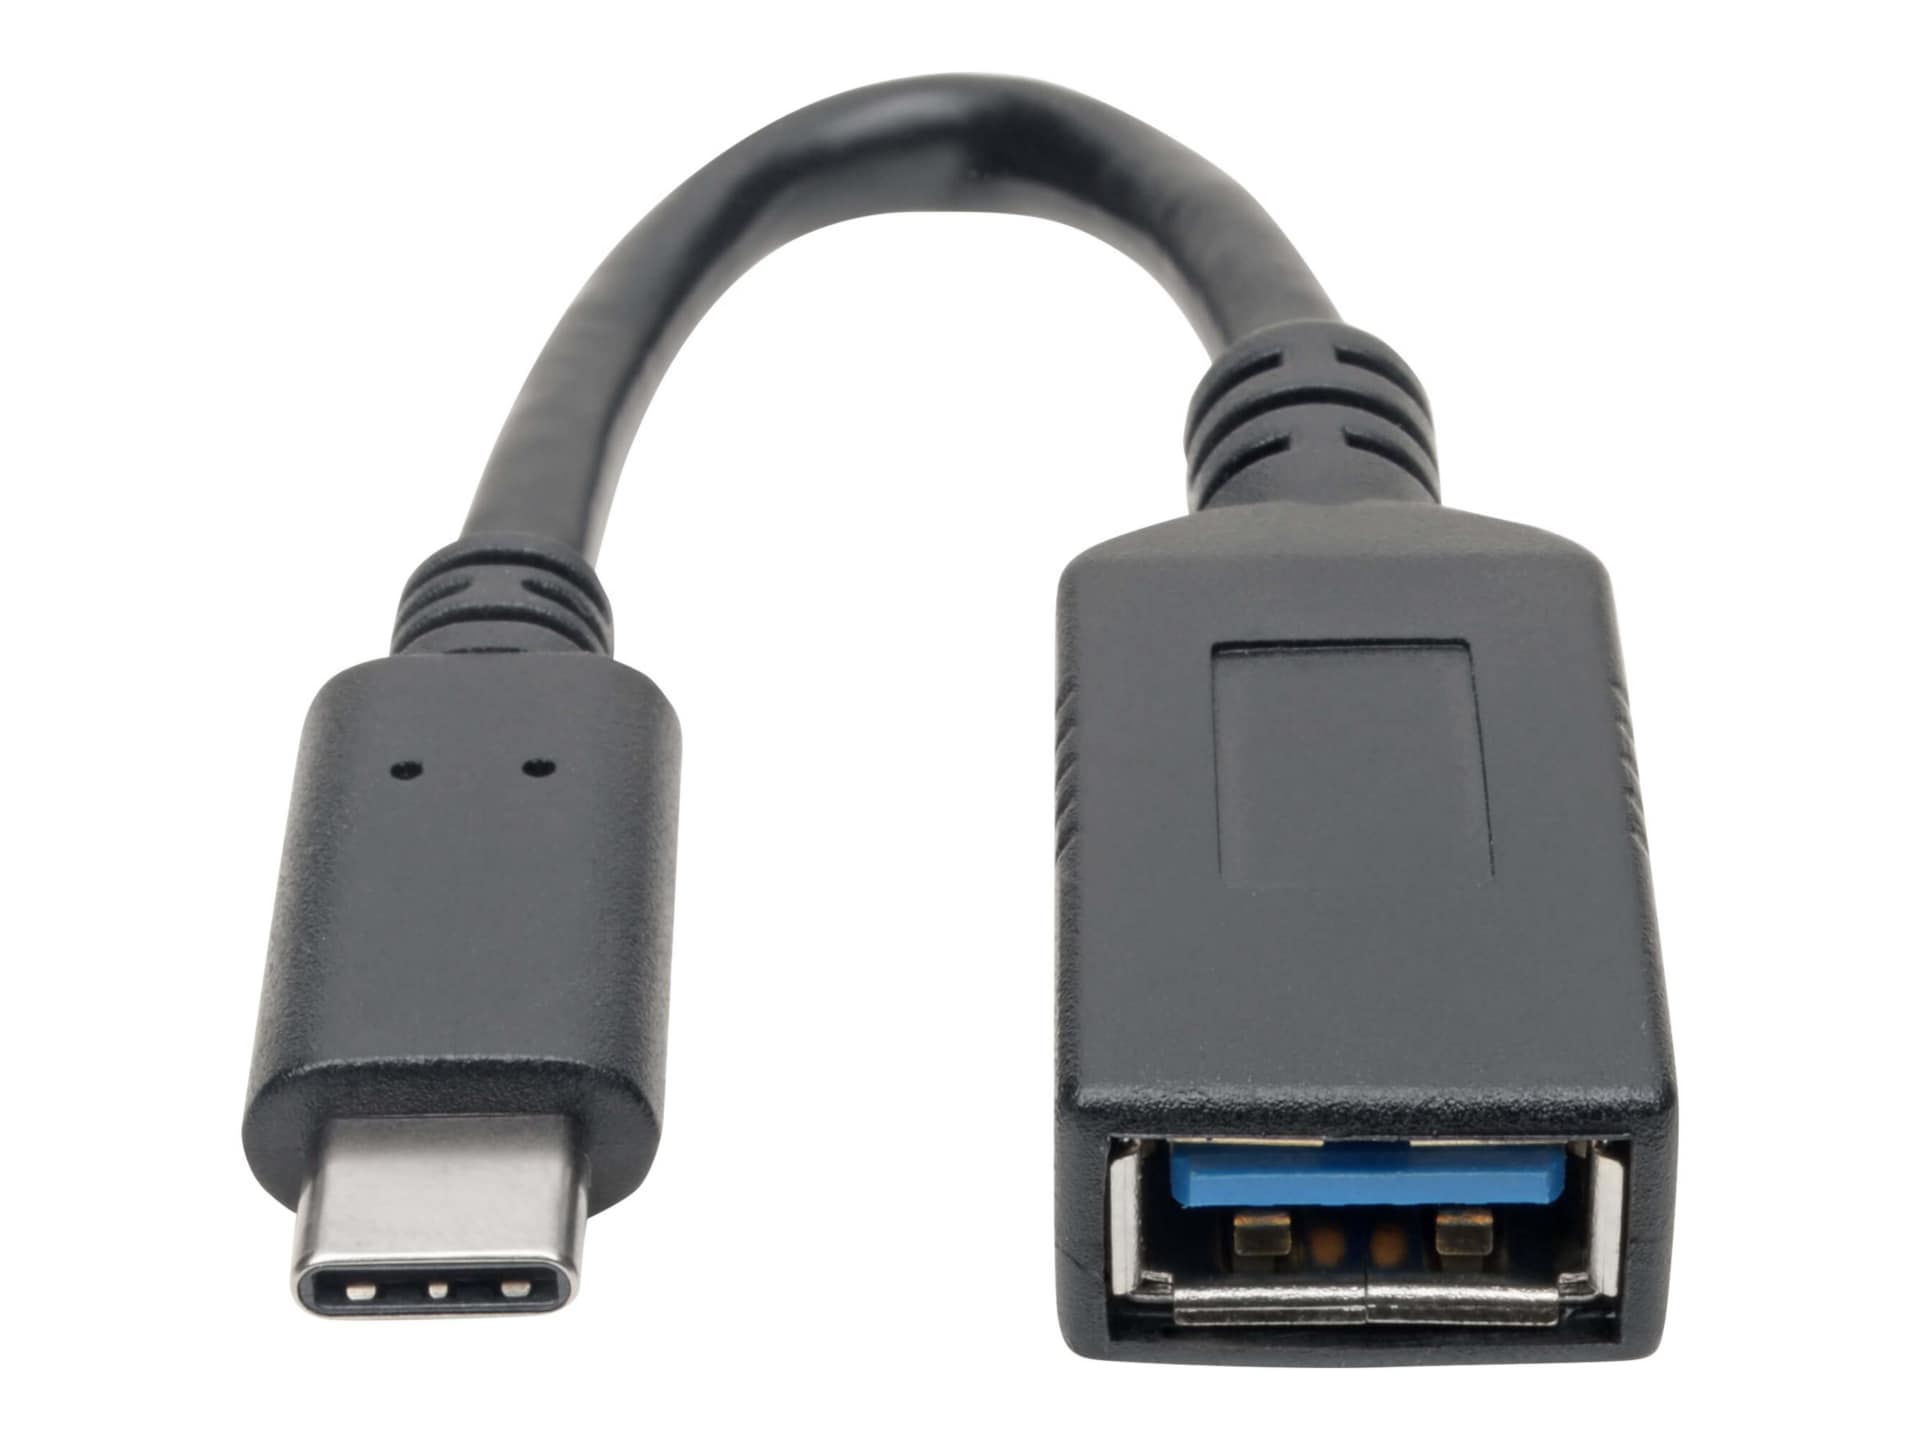 USB-C to USB-A Adapter Cable - M/F - 6in - USB 3.0 (5Gbps) - USB-IF  Certified